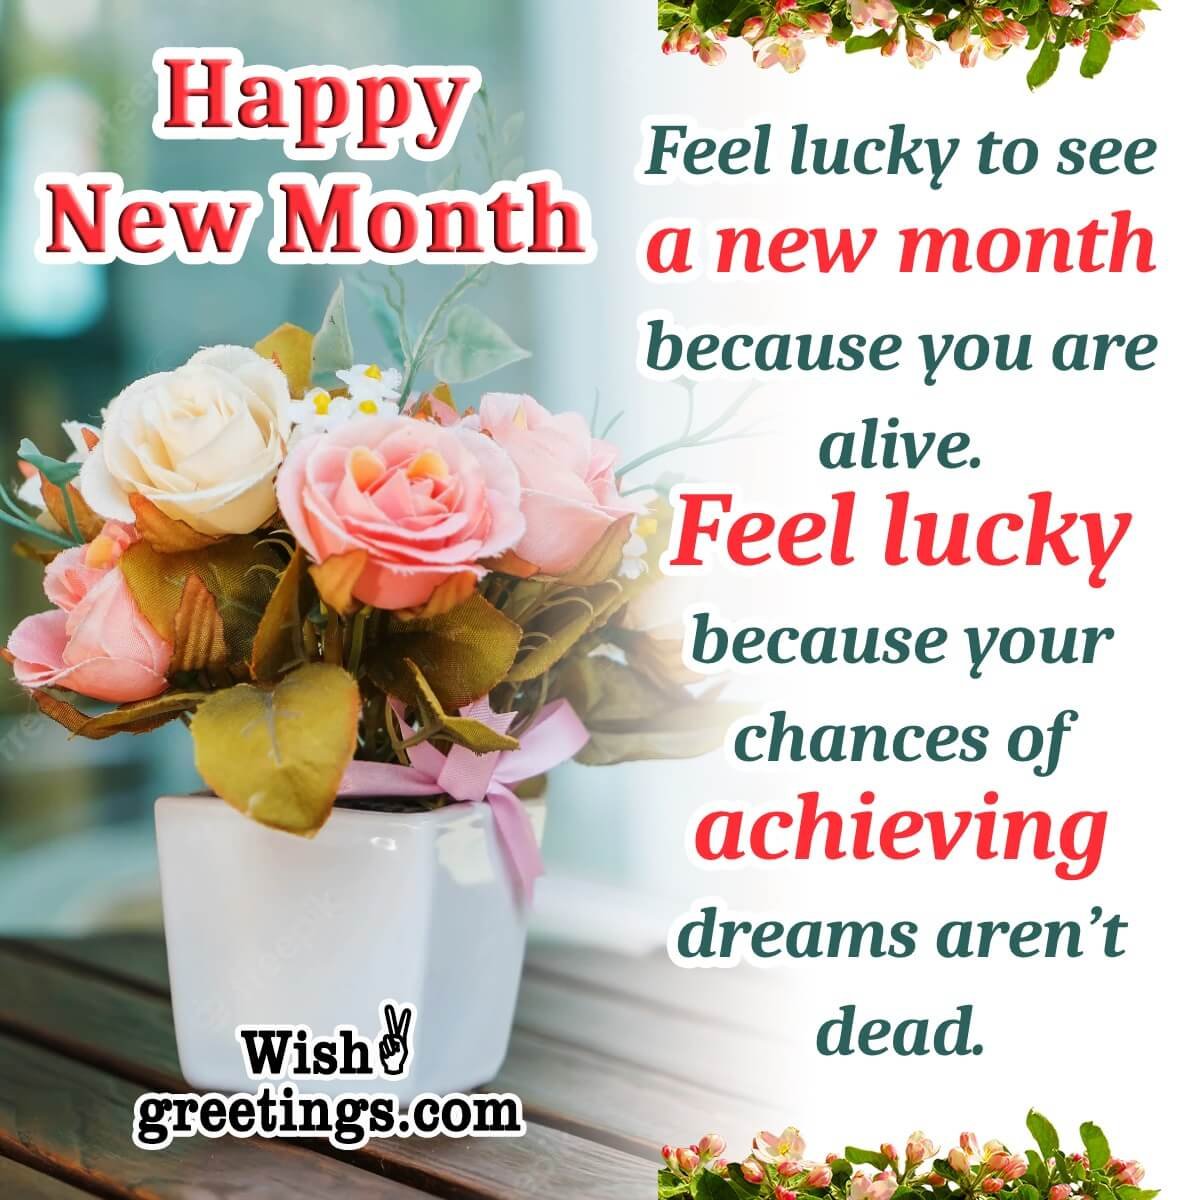 Happy New Month Inspirational Image